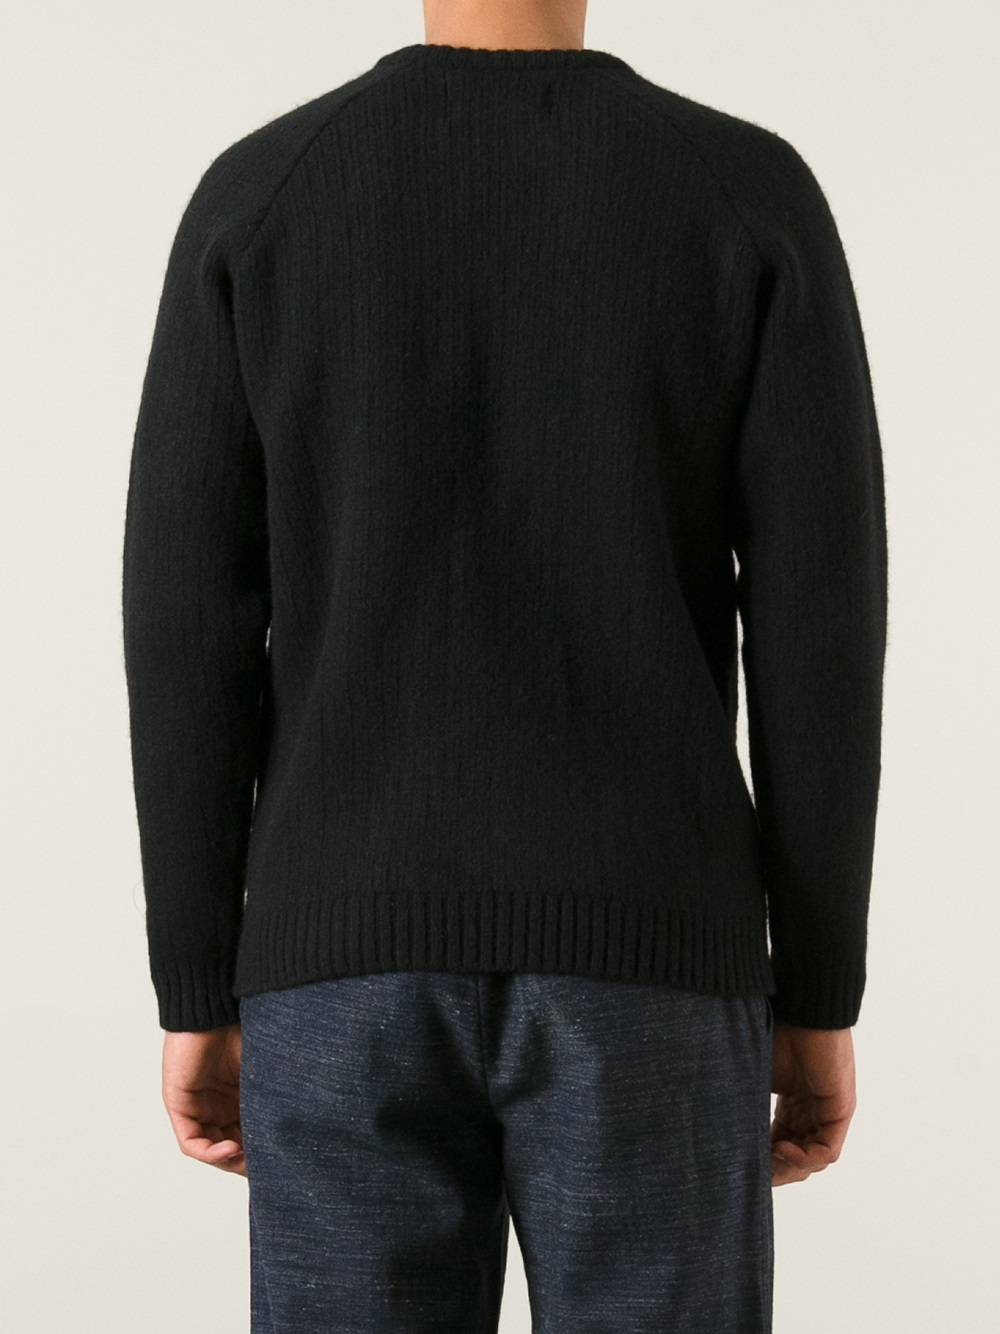 Lyst - Our Legacy Crew Neck Sweater in Black for Men